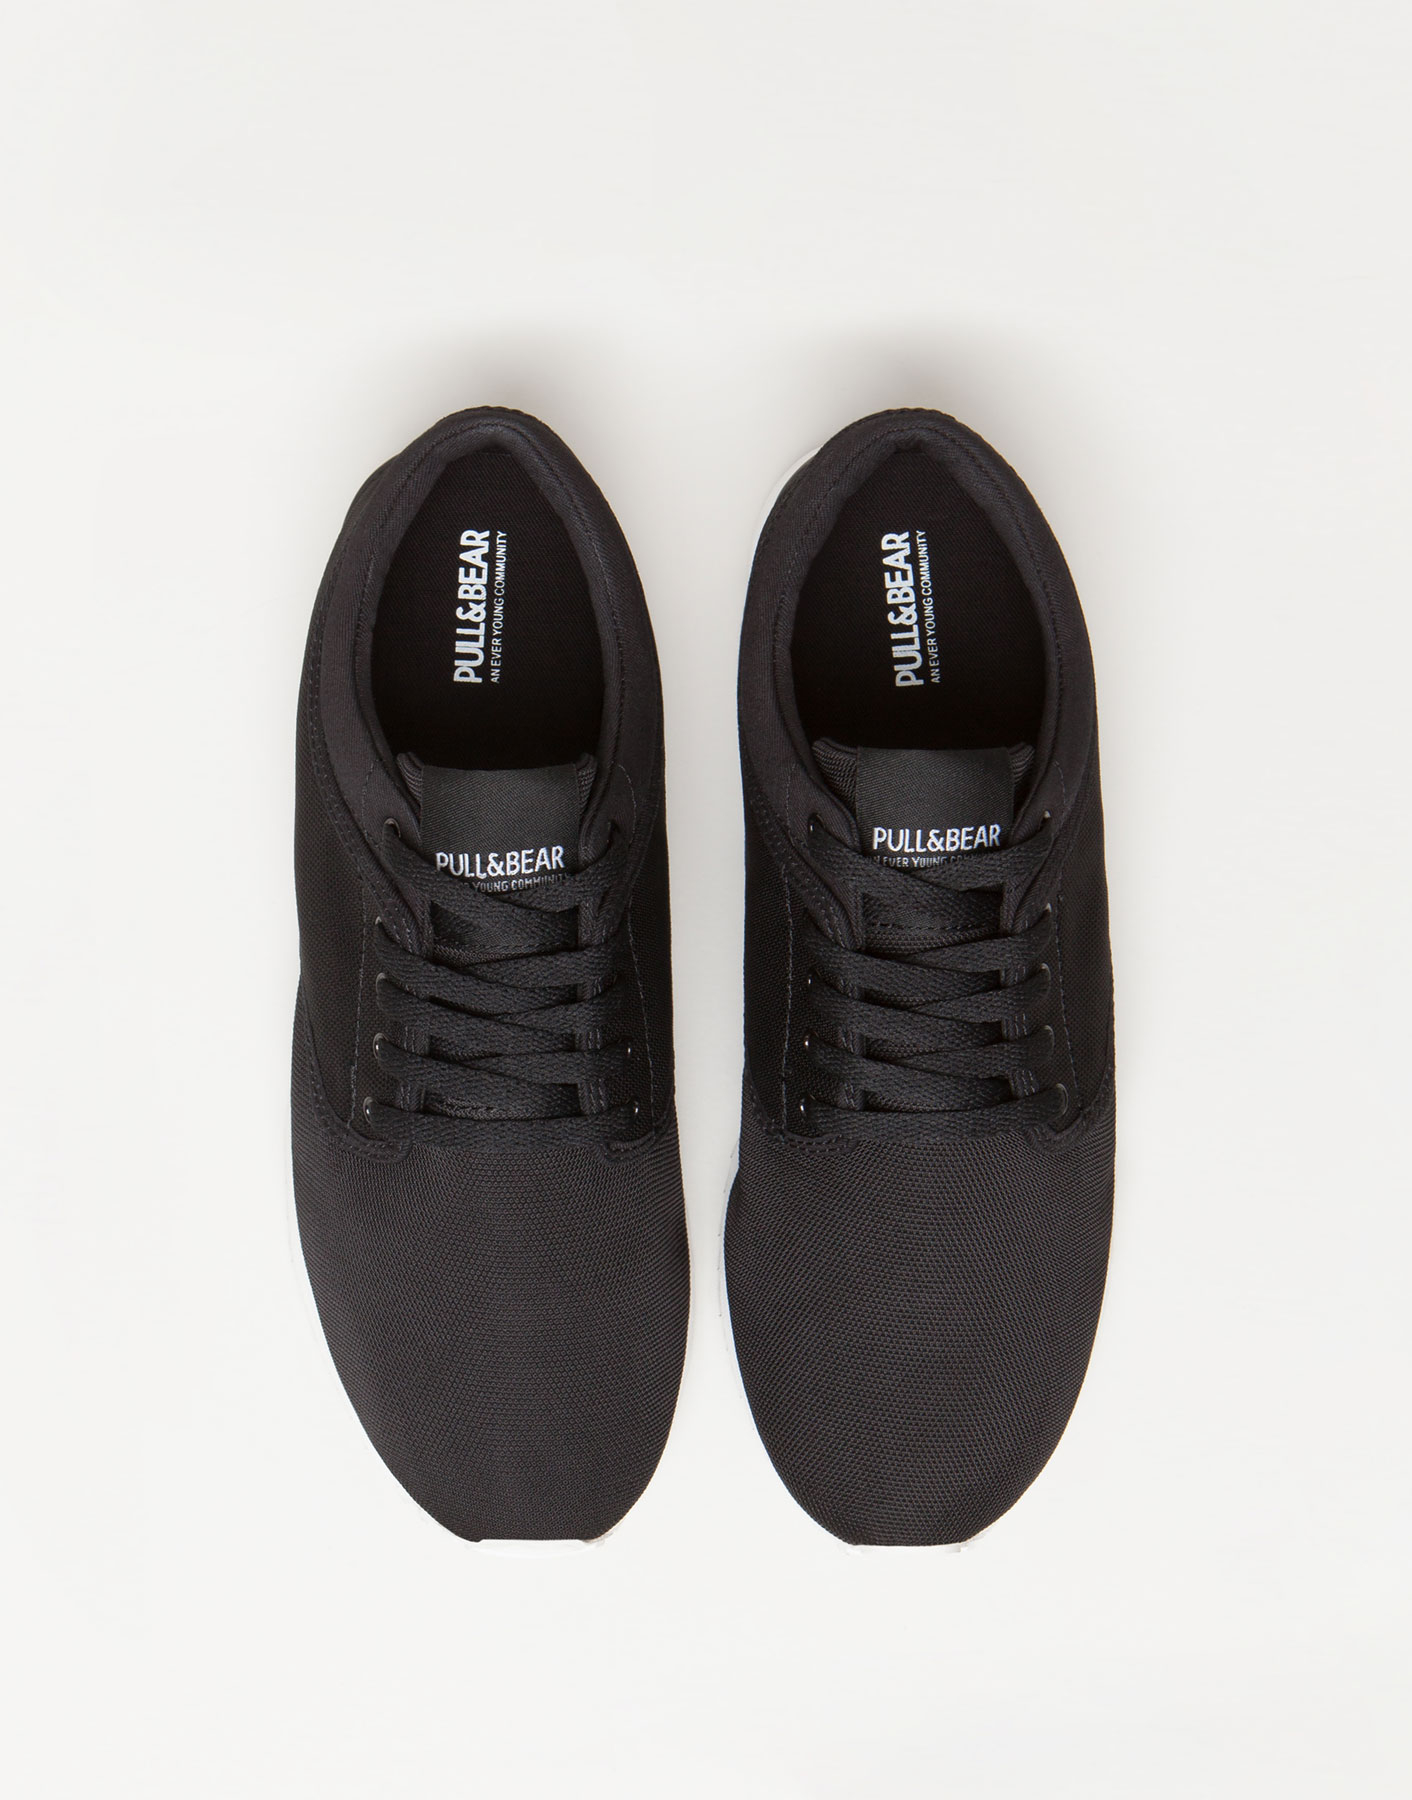 Pull&bear Sport Shoes With Mesh Detail in Black | Lyst